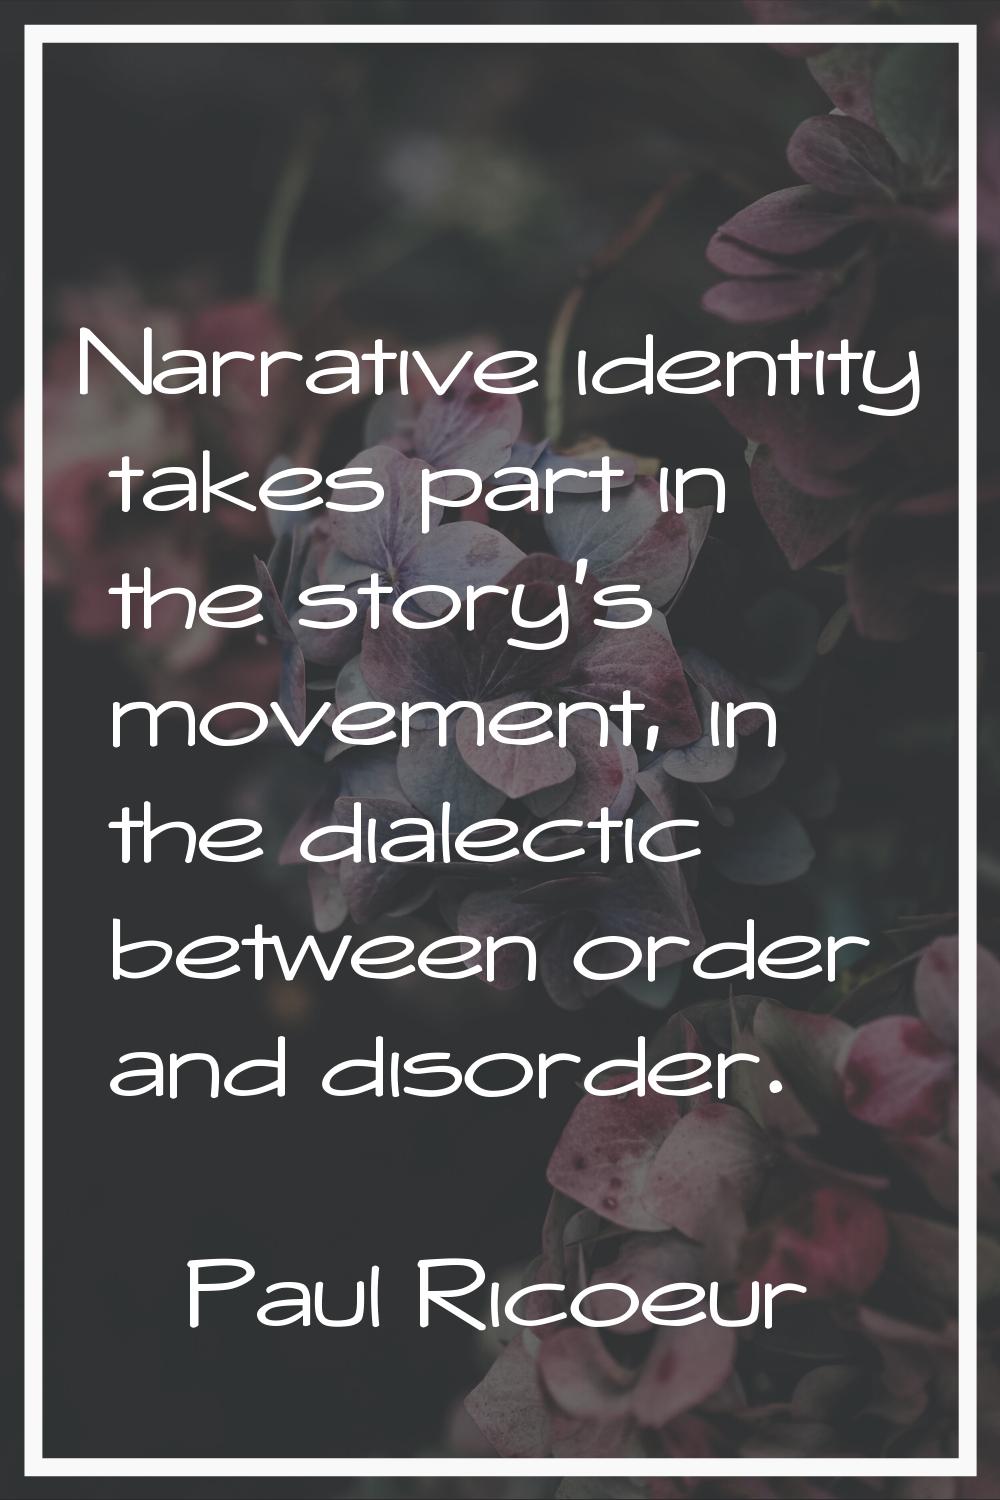 Narrative identity takes part in the story's movement, in the dialectic between order and disorder.